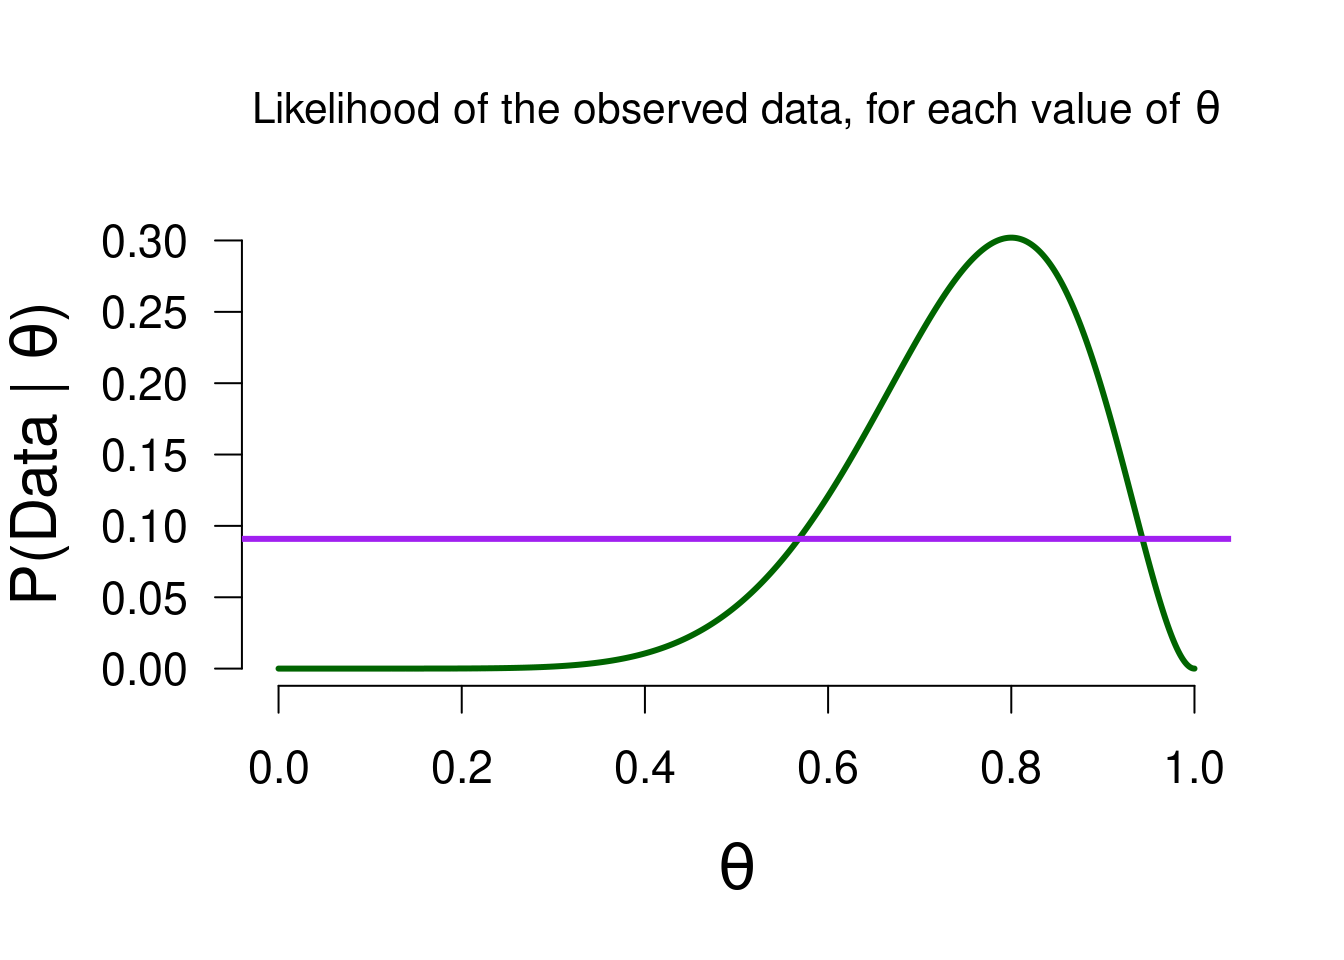 The likelihood of observing 8 heads out of 10 flips, for all possible values of theta. The purple line is the marginal likelihood, to visualize which values predicted the observed data better than average.